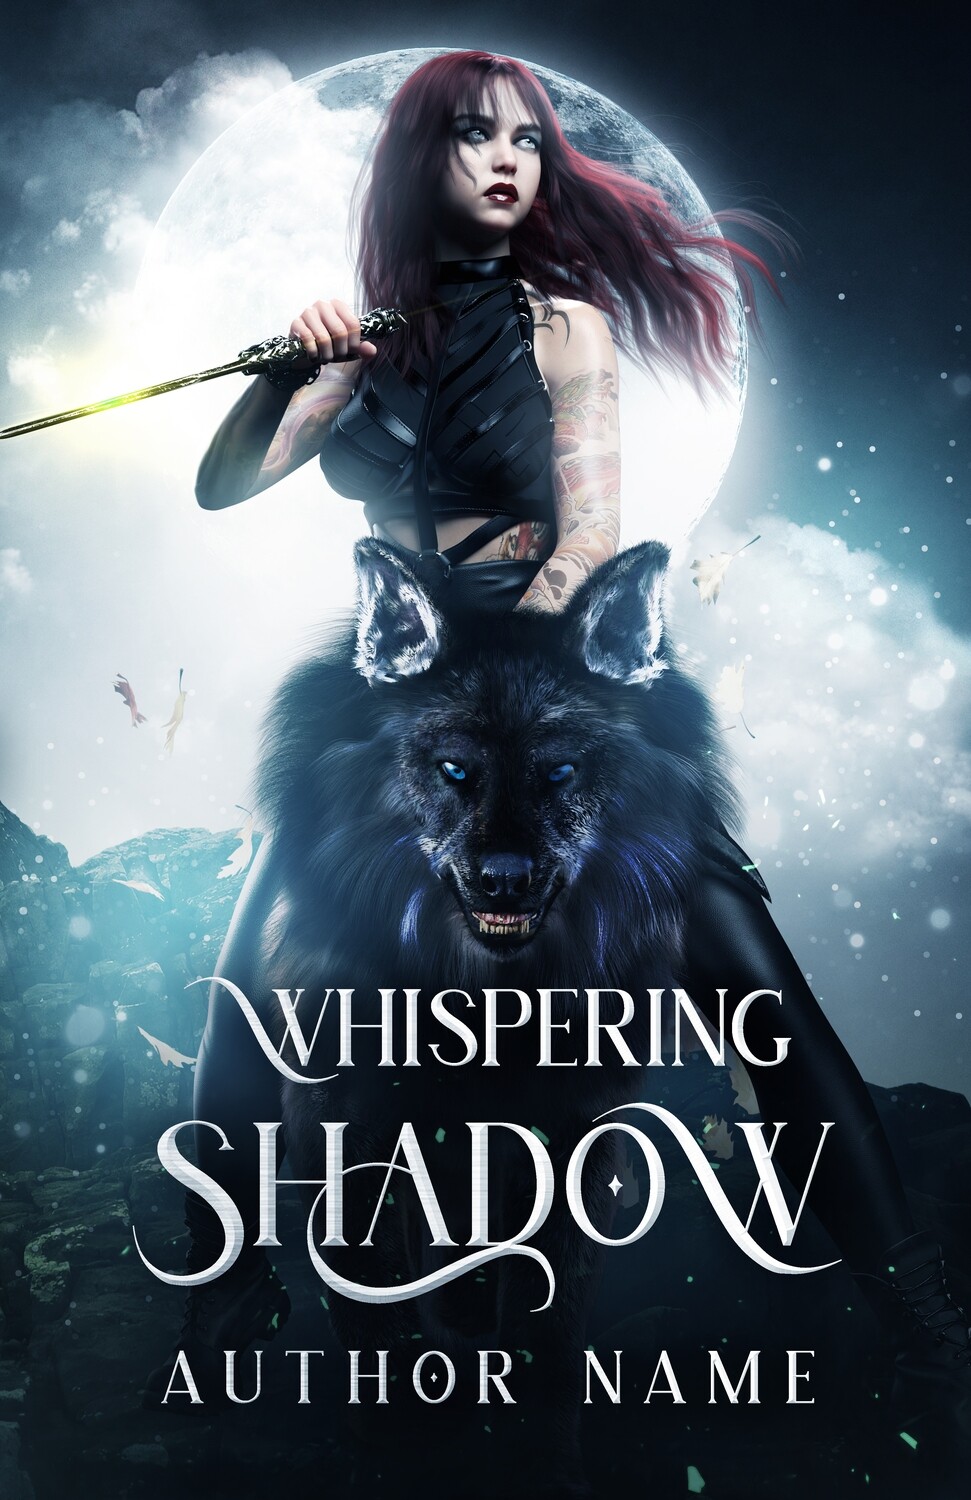 Ebook + Paperback: The Whispering Shadow